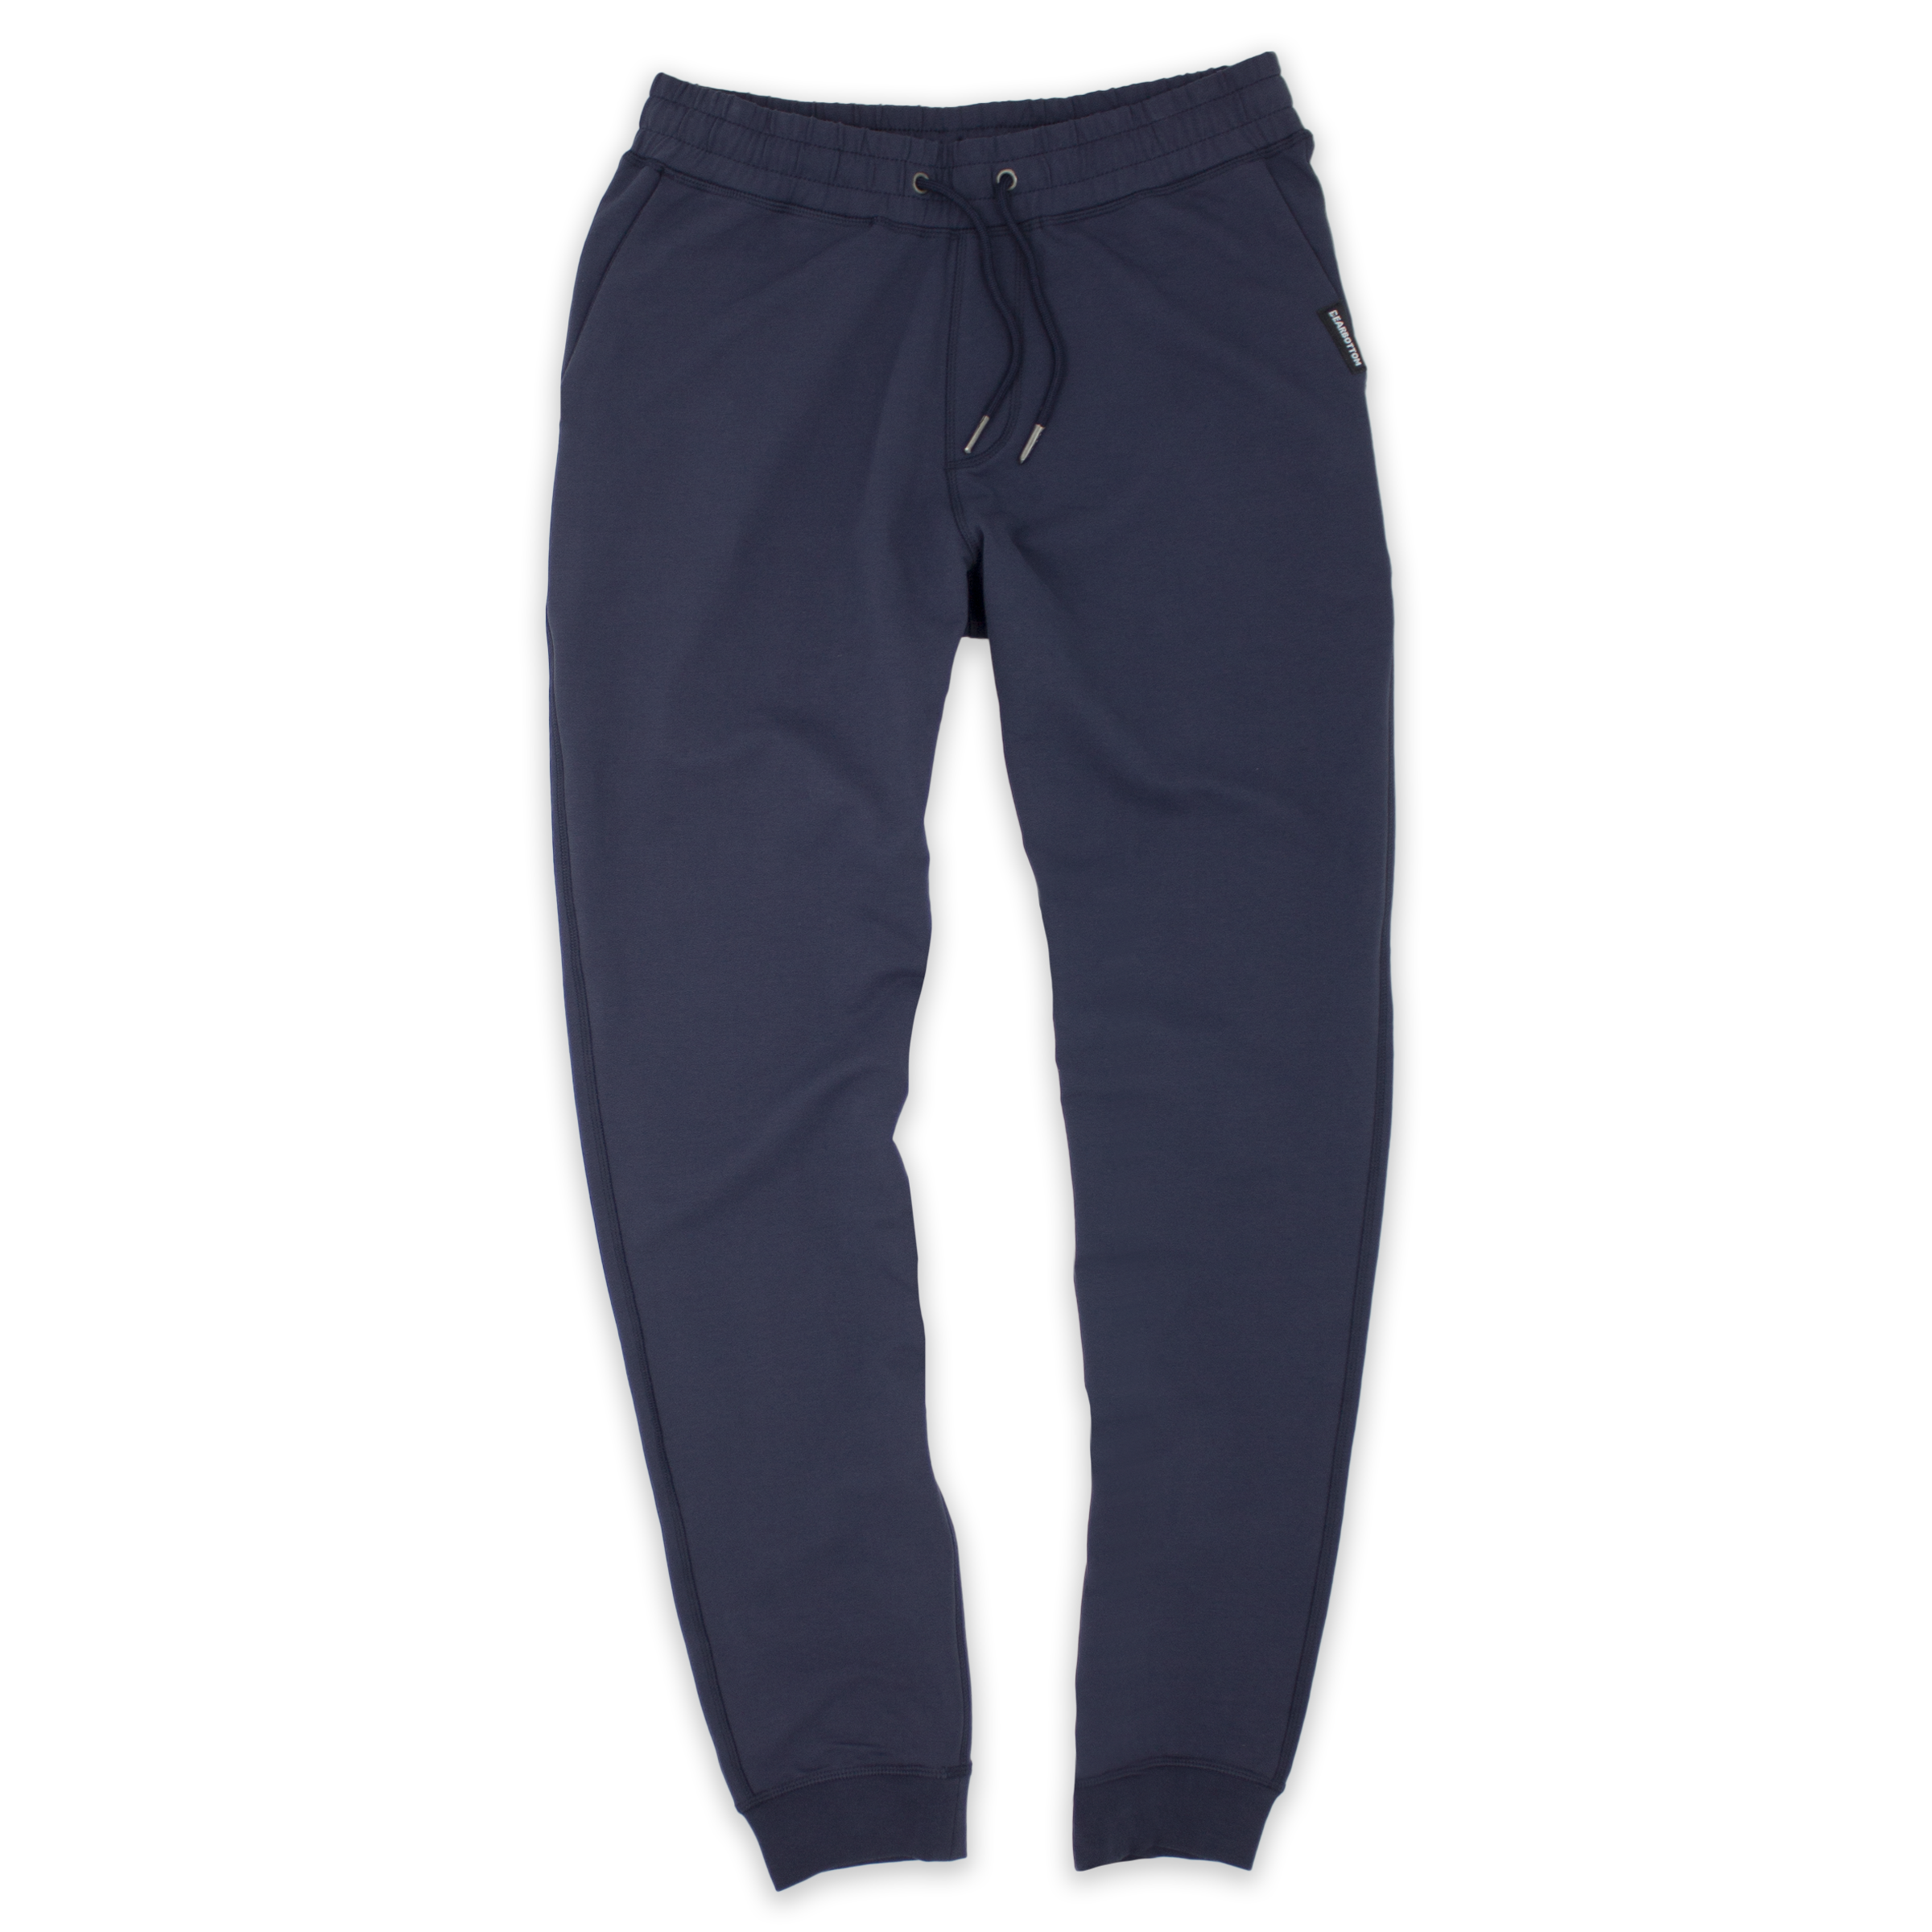 Loft Jogger Navy with elastic waistband, drawstring with metal tips, two inseam pockets, and ribbed ankle cuffs